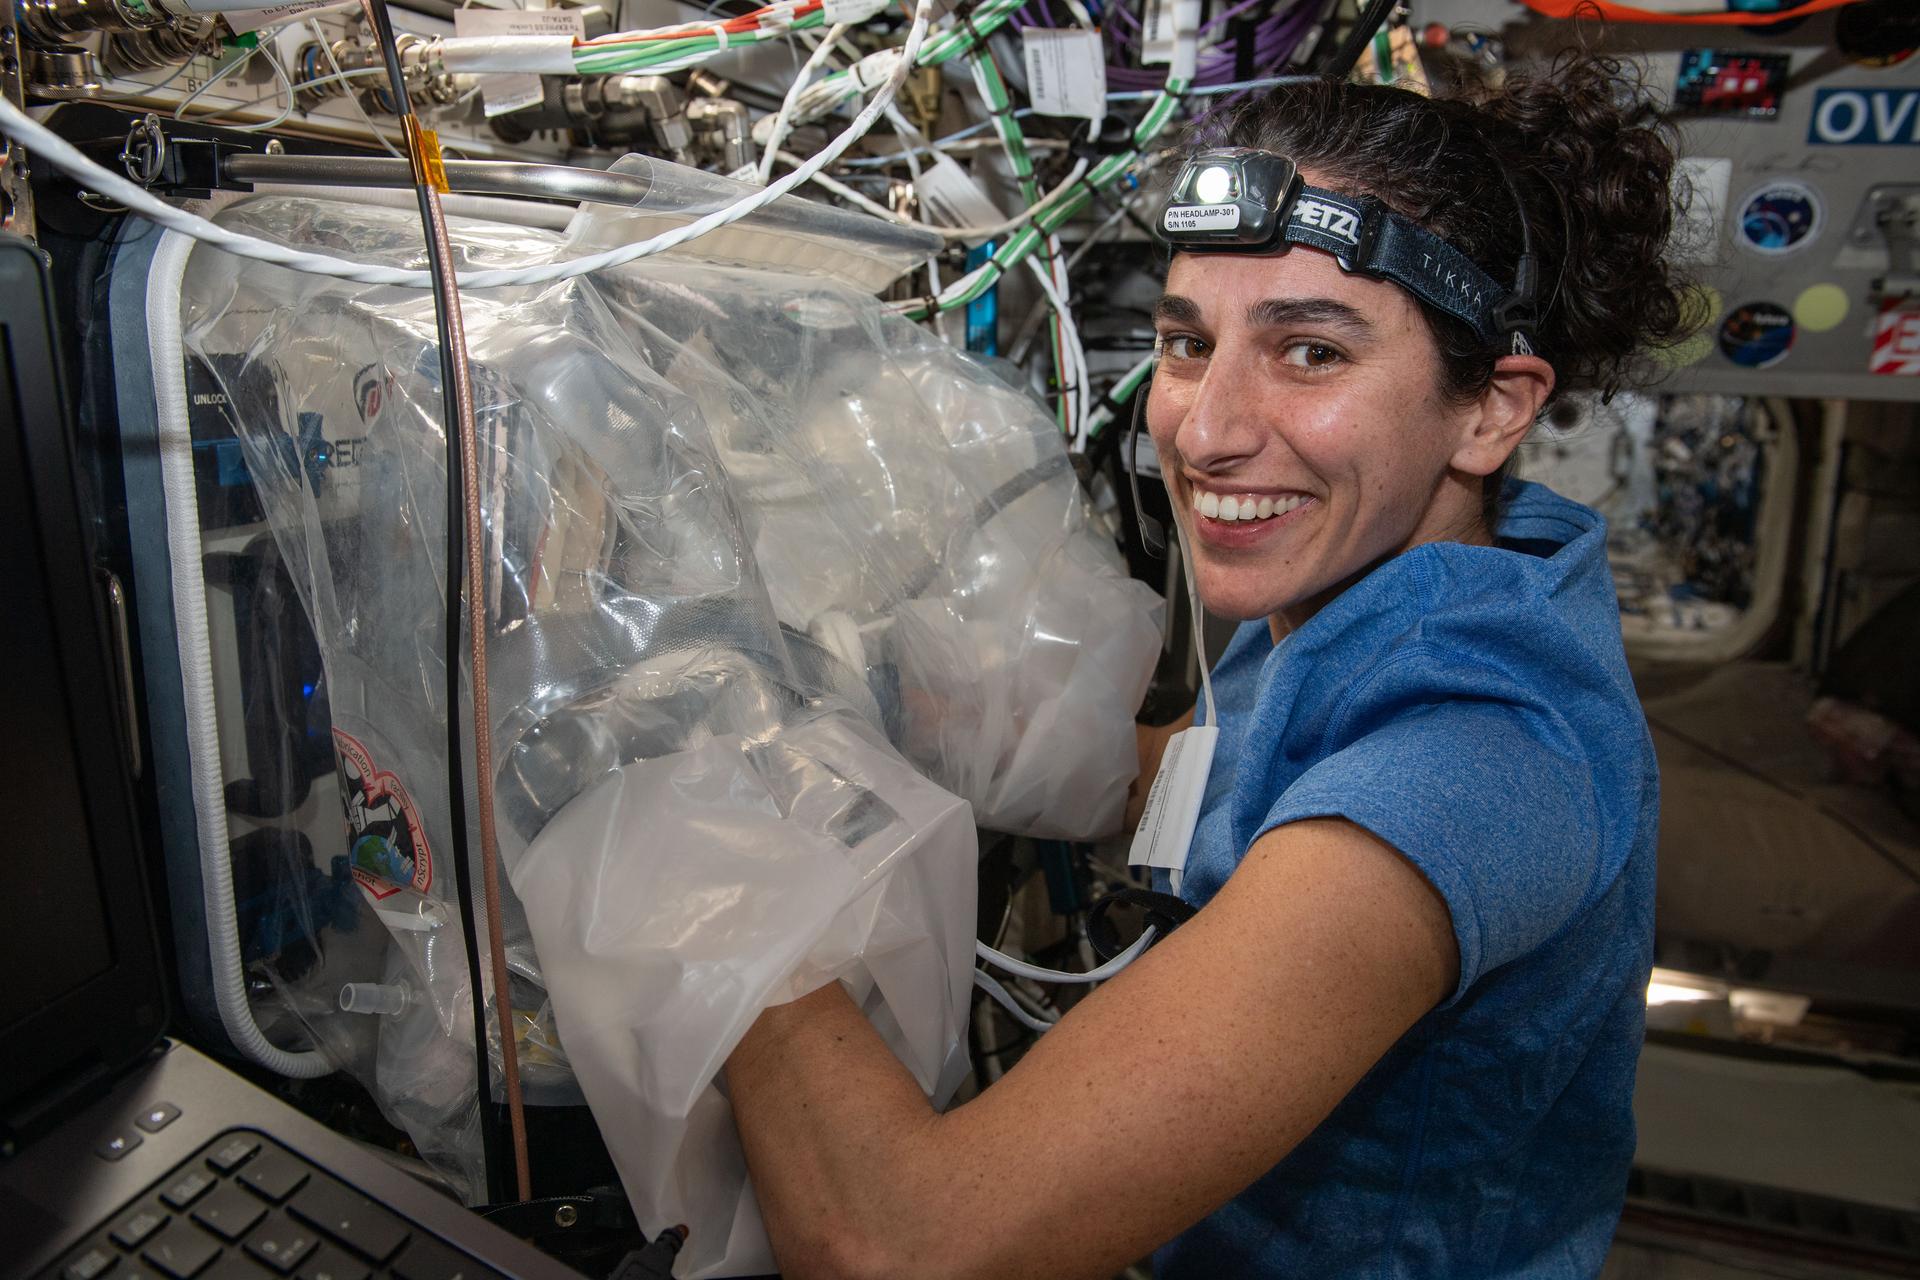 Moghbeli’s arms are inserted into large plastic gloves that are connected to a clear flexible plastic glovebag attached to the wall of the space station. Moghbeli is wearing a blue shirt and a headlamp. She is looking at the camera over her shoulder and smiling.